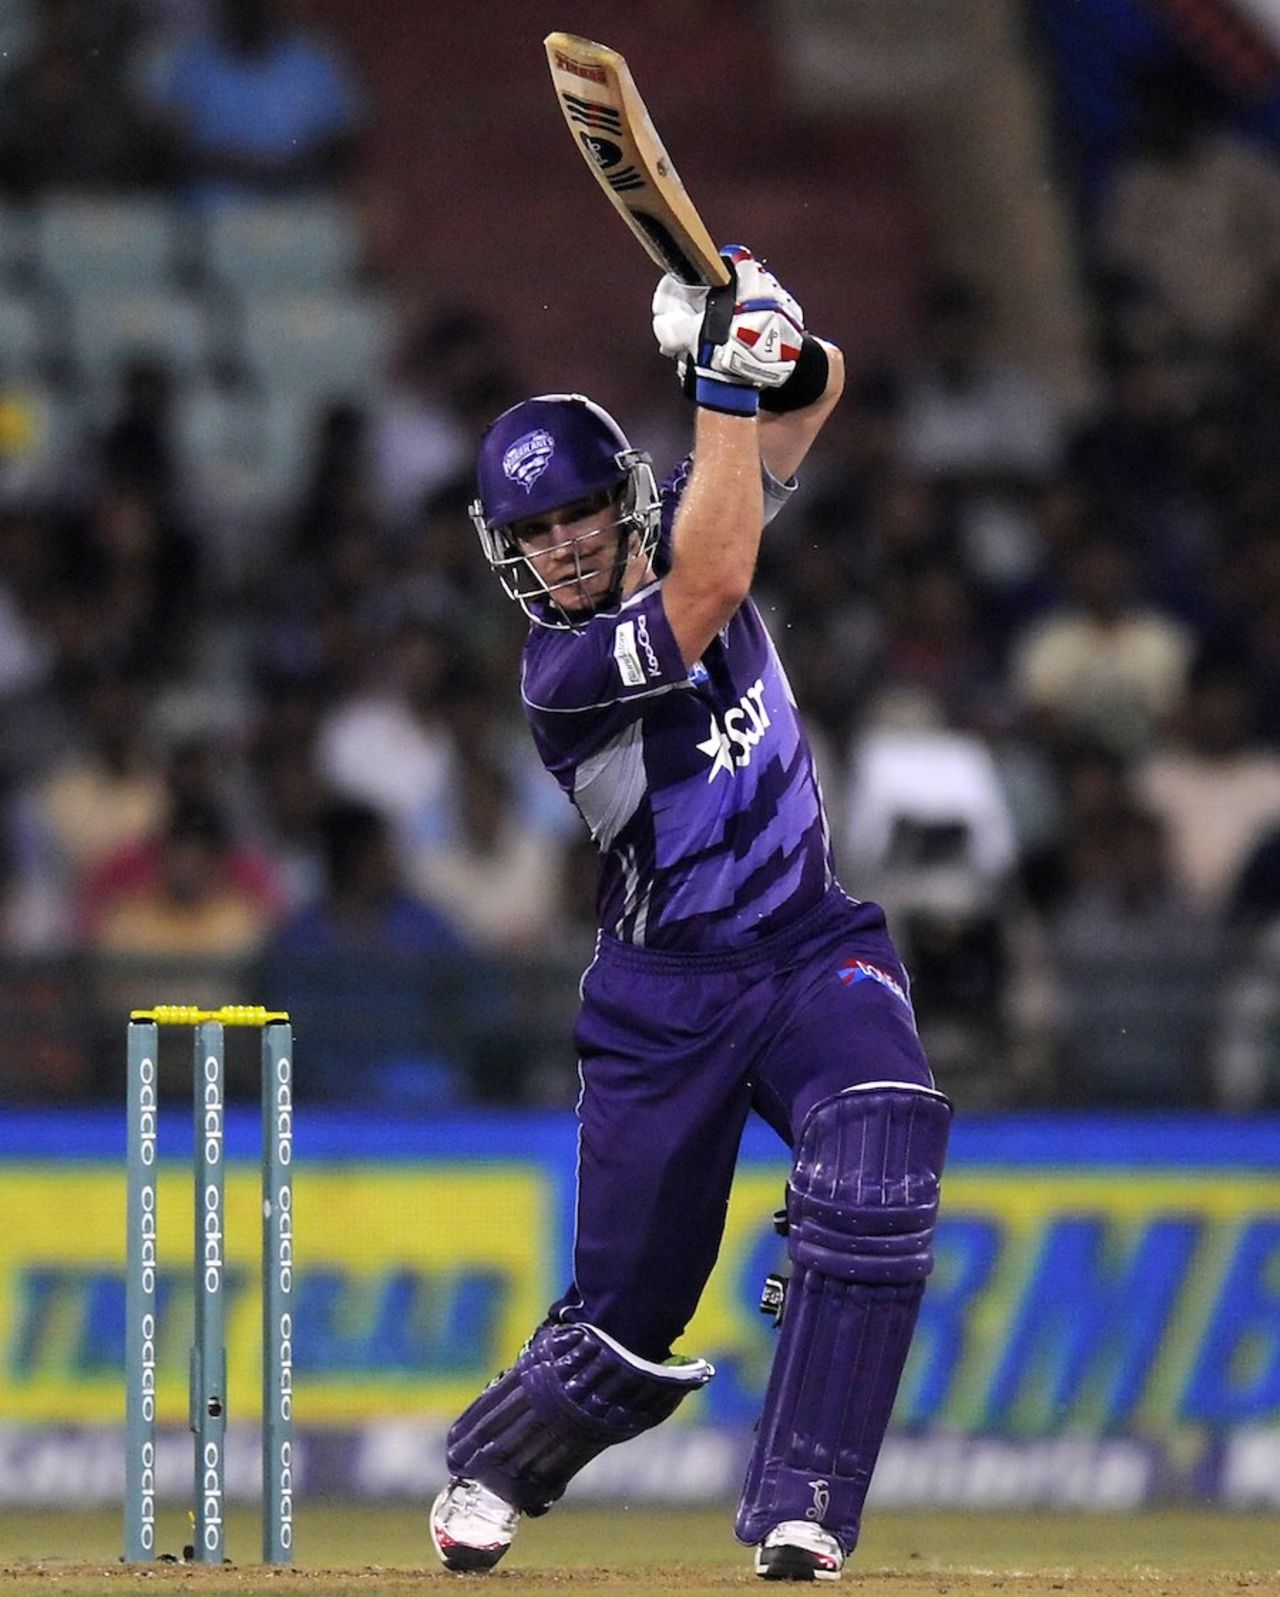 Tim Paine hits through the off side, Hobart Hurricanes v Northern Knights, CLT20, Group B, Raipur, September 23, 2014